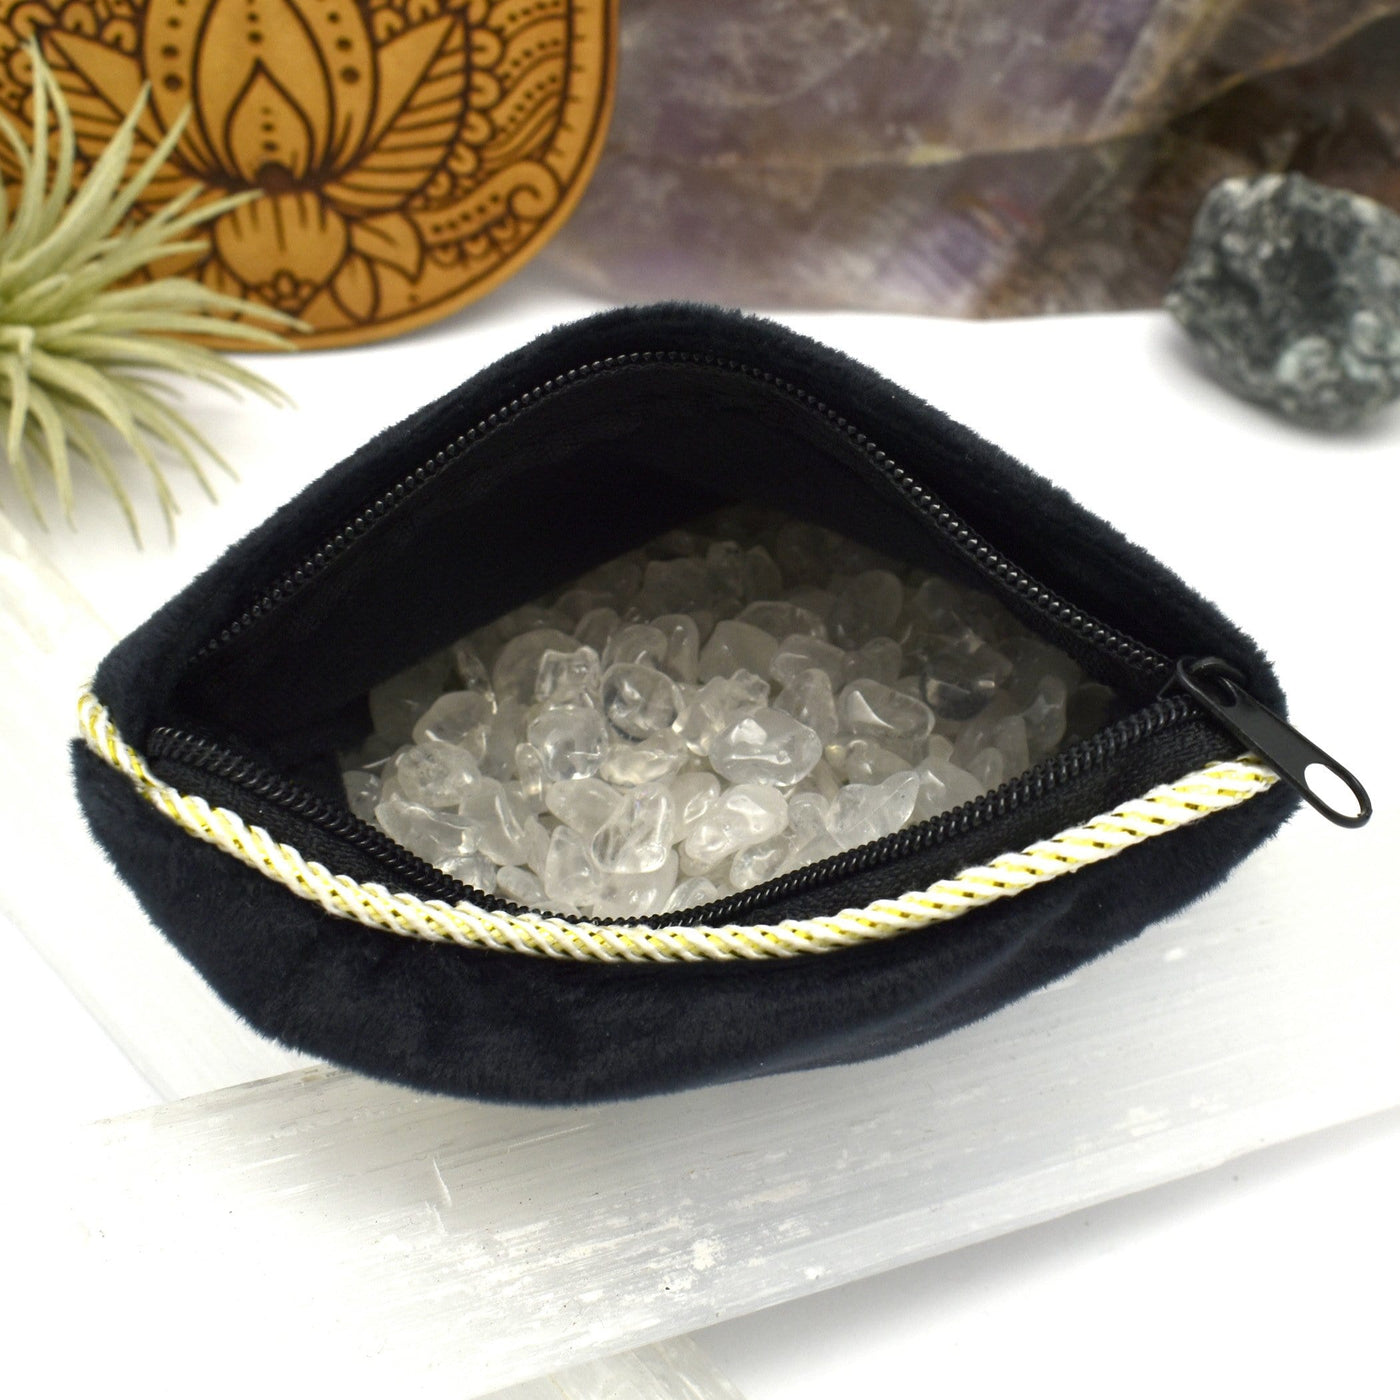 Cristal Tumbled Stones with the pillow open.